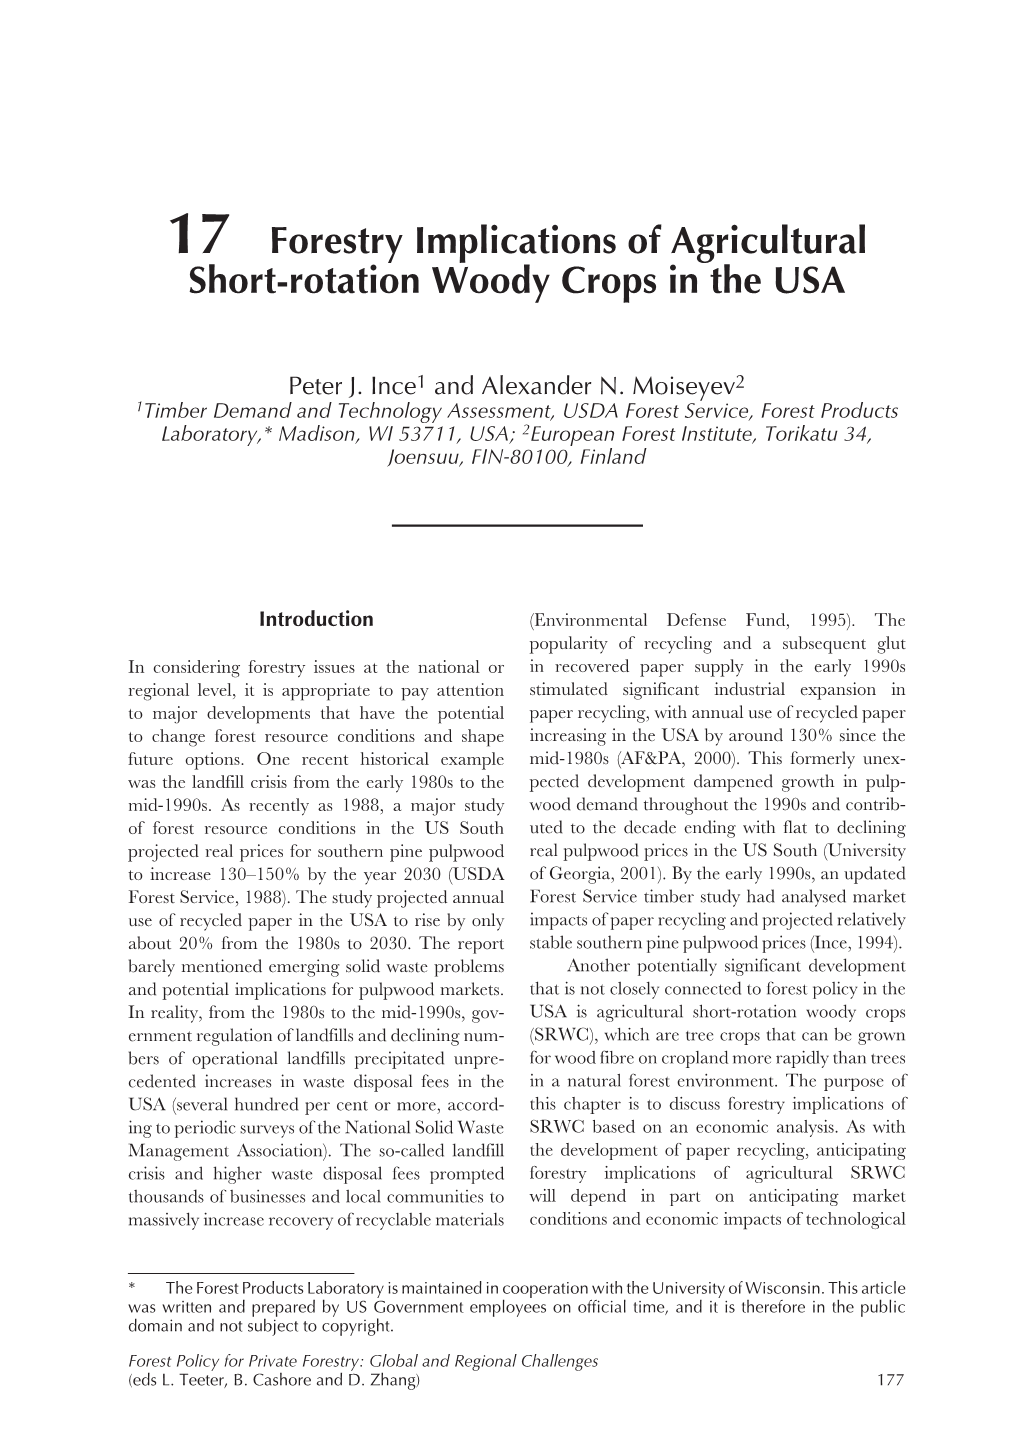 Forestry Implications of Agricultural Short-Rotation Woody Crops in the USA